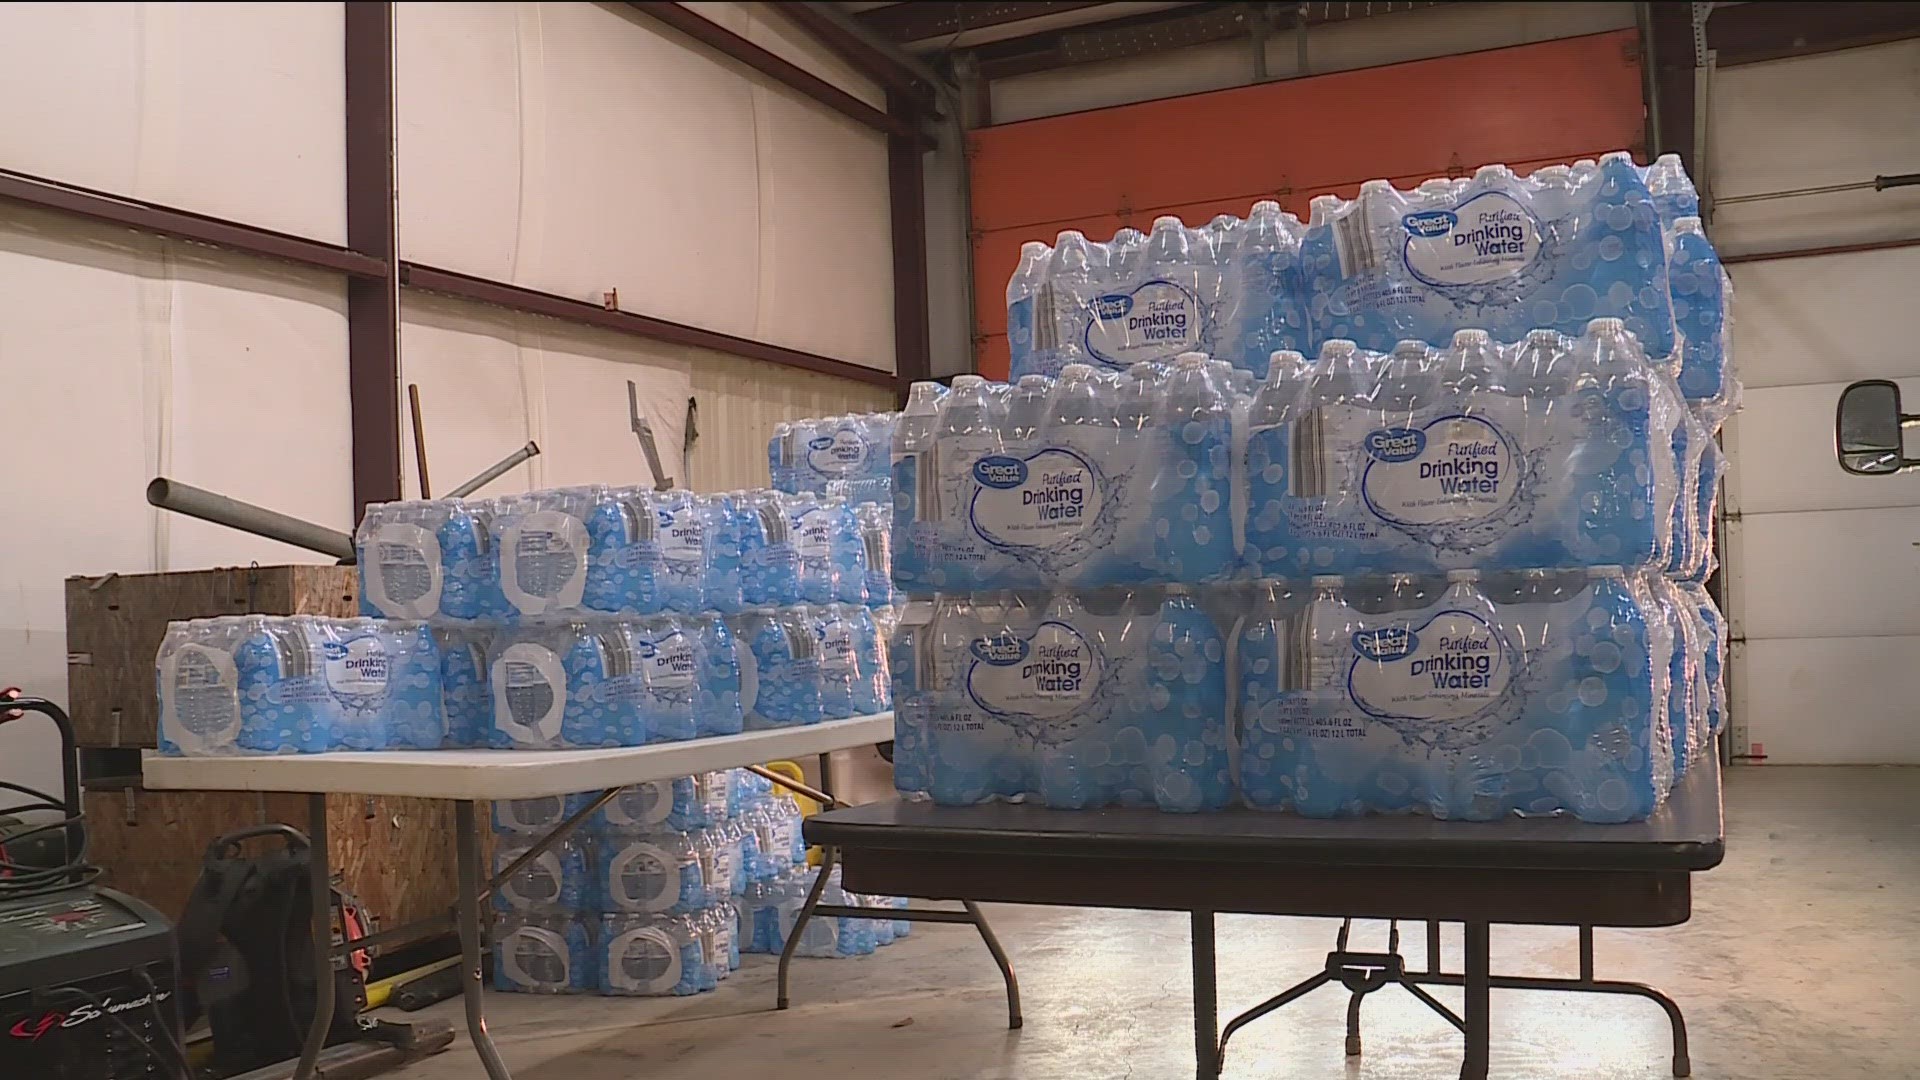 NEW AT 10 -- A STATE OF EMERGENCY IN SEBASTIAN COUNTY AS HUNDREDS OF FAMILIES ARE WITHOUT WATER TONIGHT.